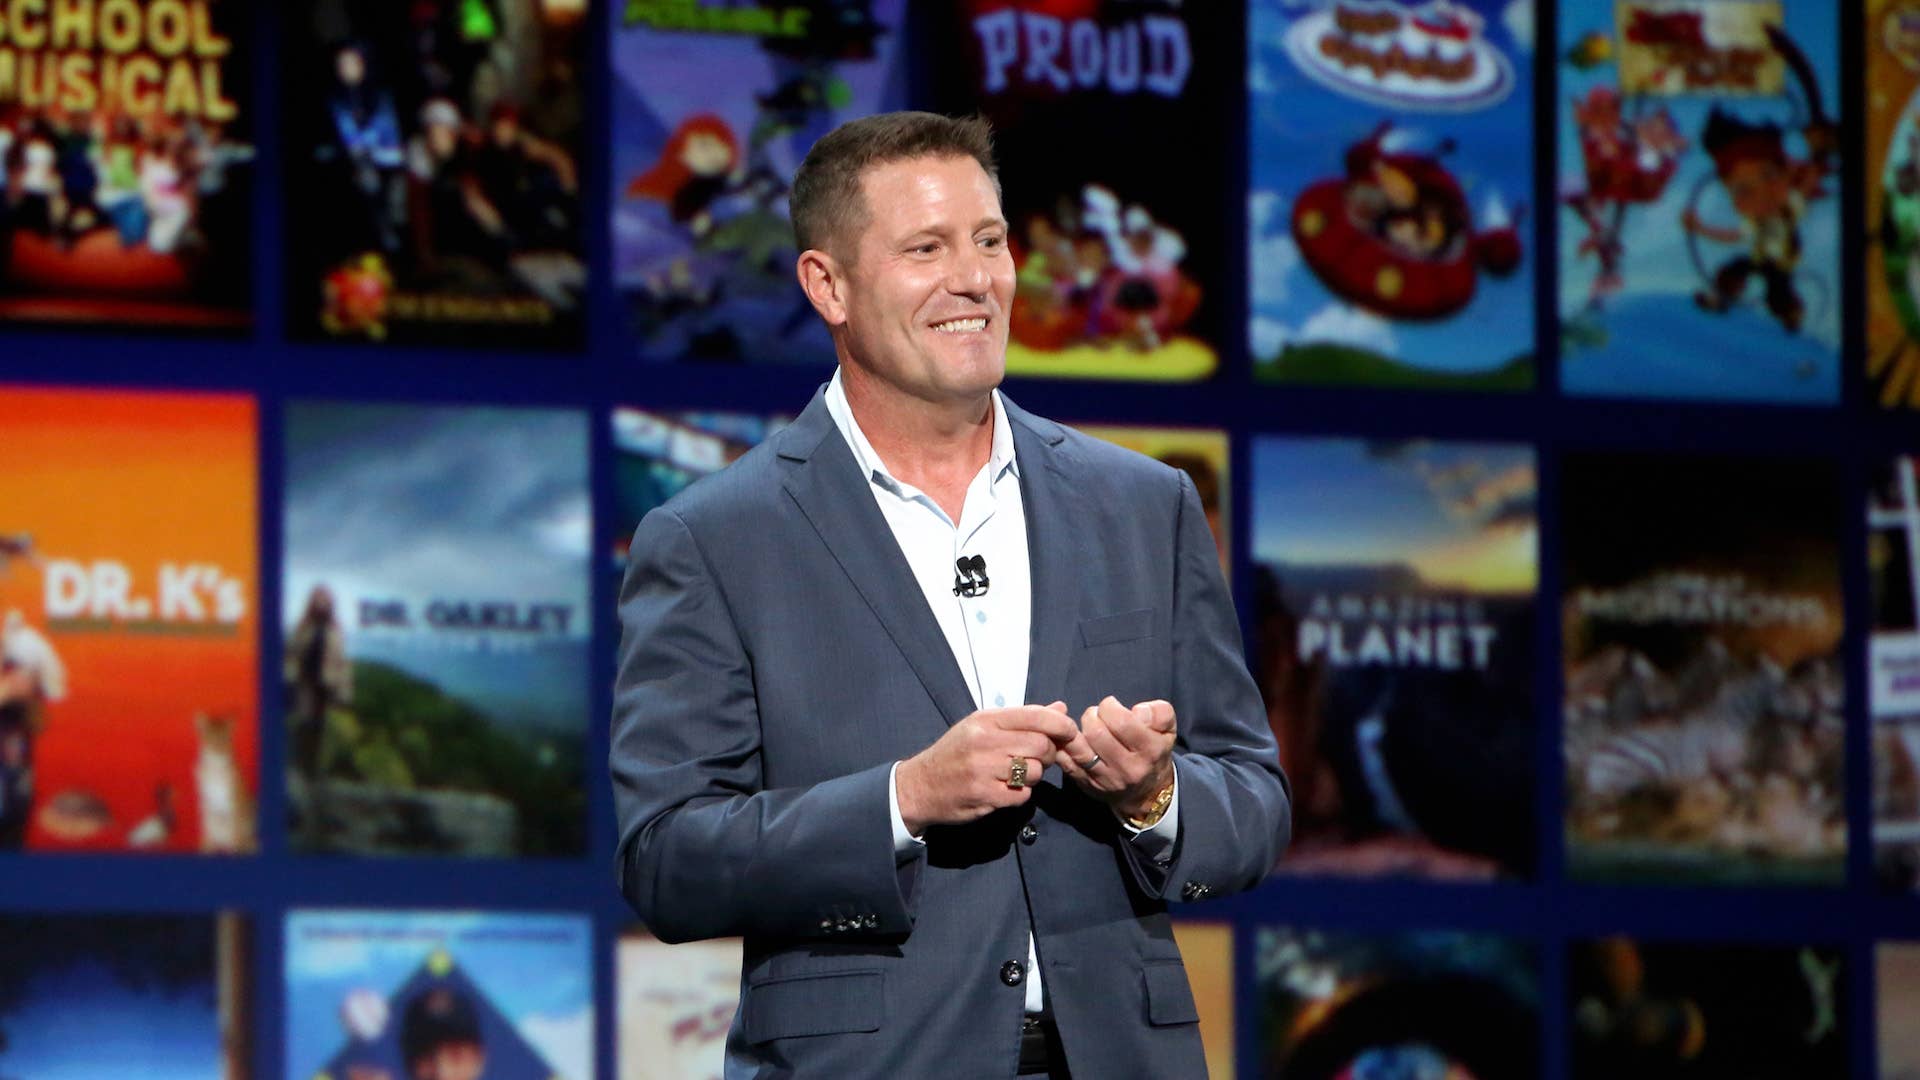 Disney's Chairman of Direct to Consumer division Kevin Mayer at Disney+ Showcase.